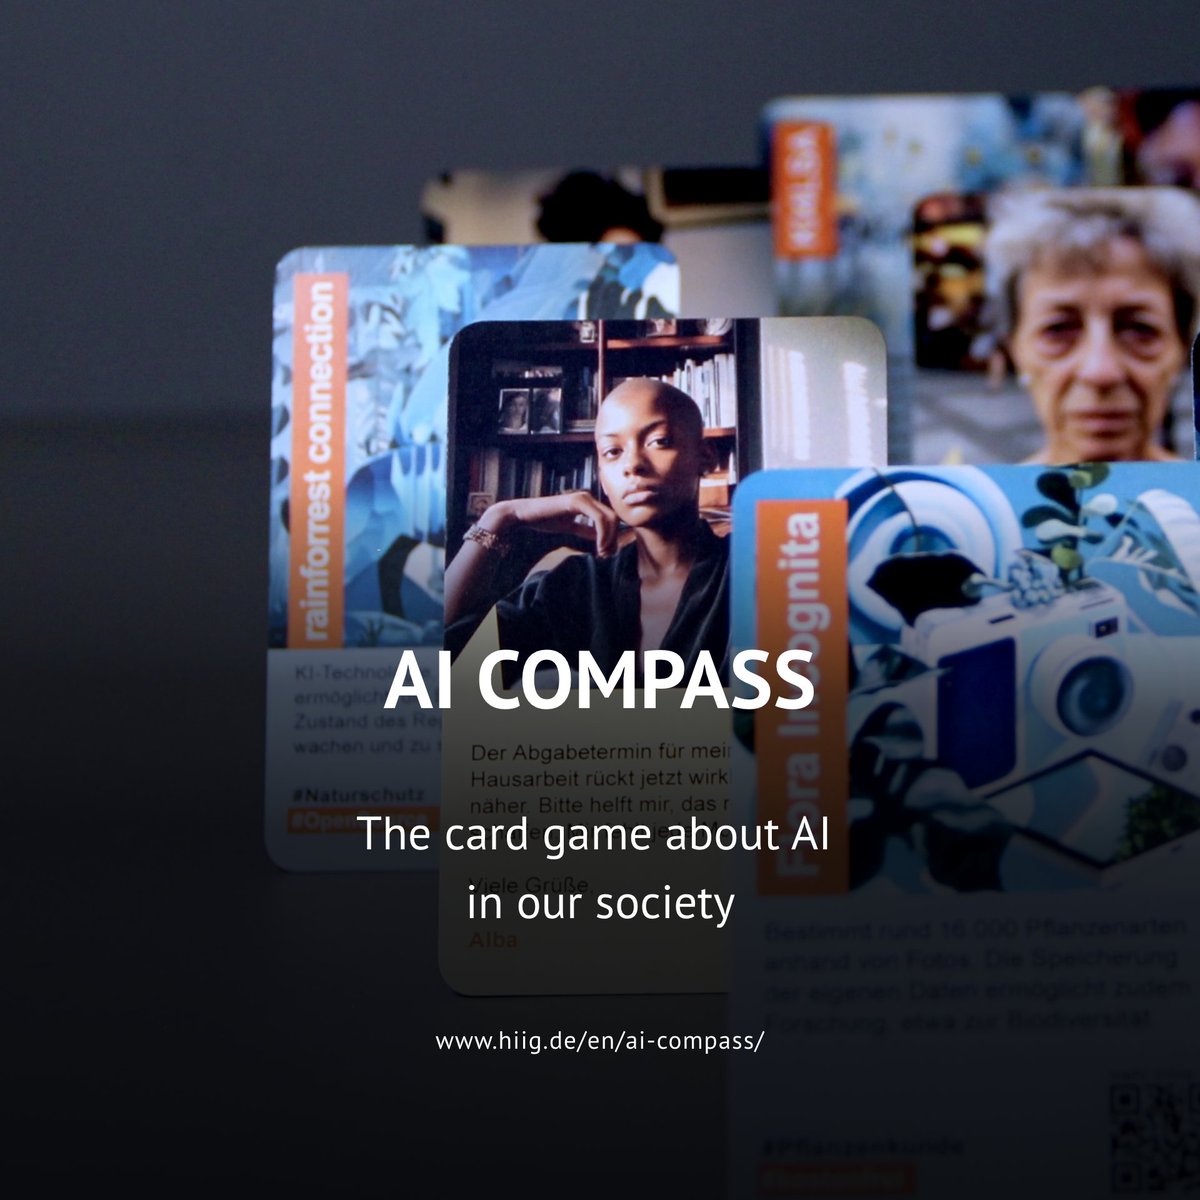 Our #AI card game is finally available in English! With the “AI Compass”, you & your team take on the role of ultimate AI experts & help citizens with their queries! Your mission: Find out which problems can actually be solved by AI systems. 🧭 More info: hiig.de/en/ai-compass/